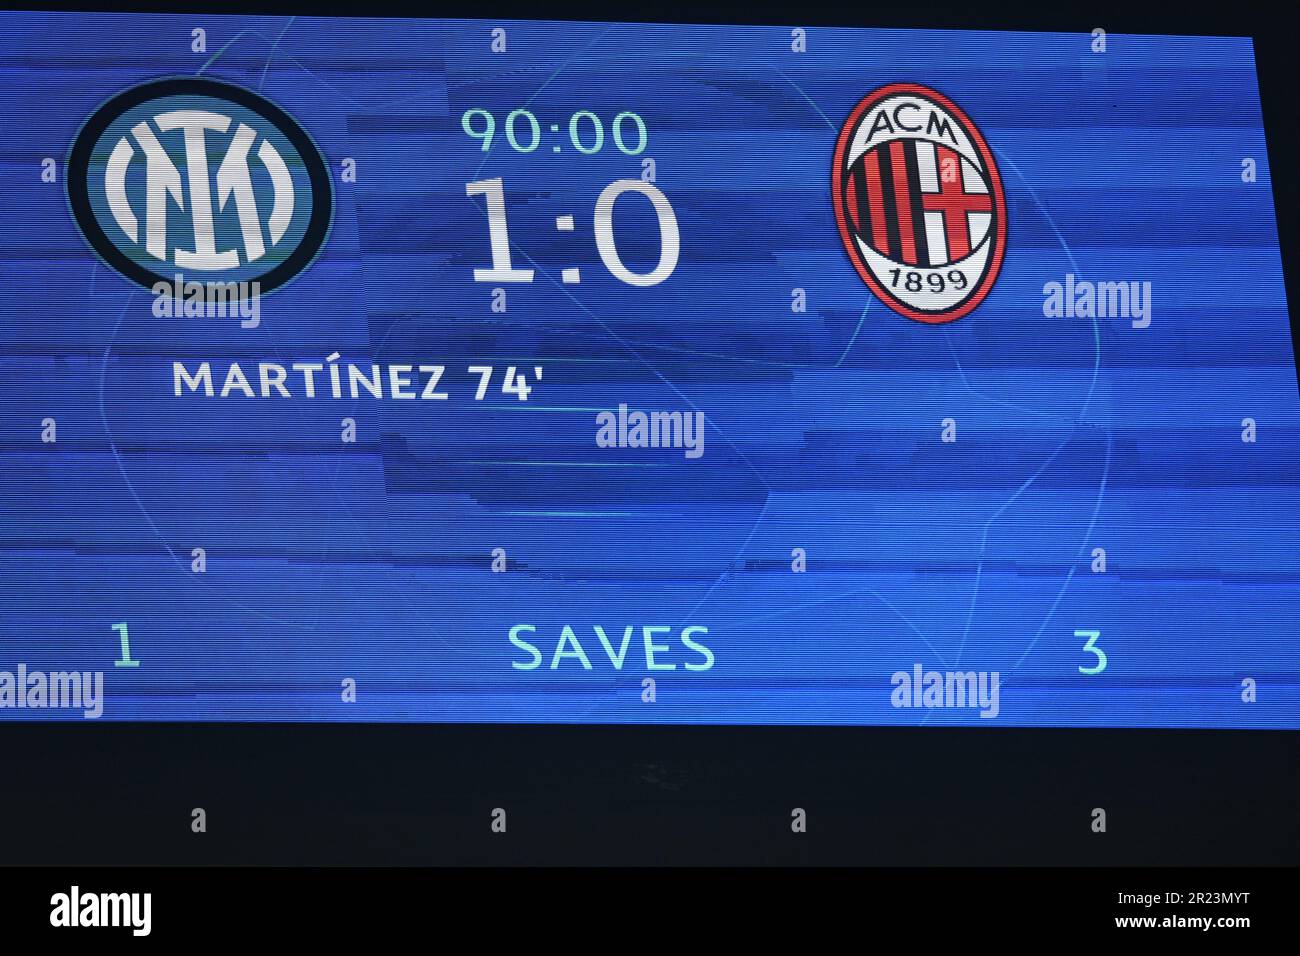 Scoreboard during the UEFA Champions League 2022 2023 match between Inter 1-0 Milan at Giuseppe Meazza Stadium on May 16, 2023 in Milano, Italy